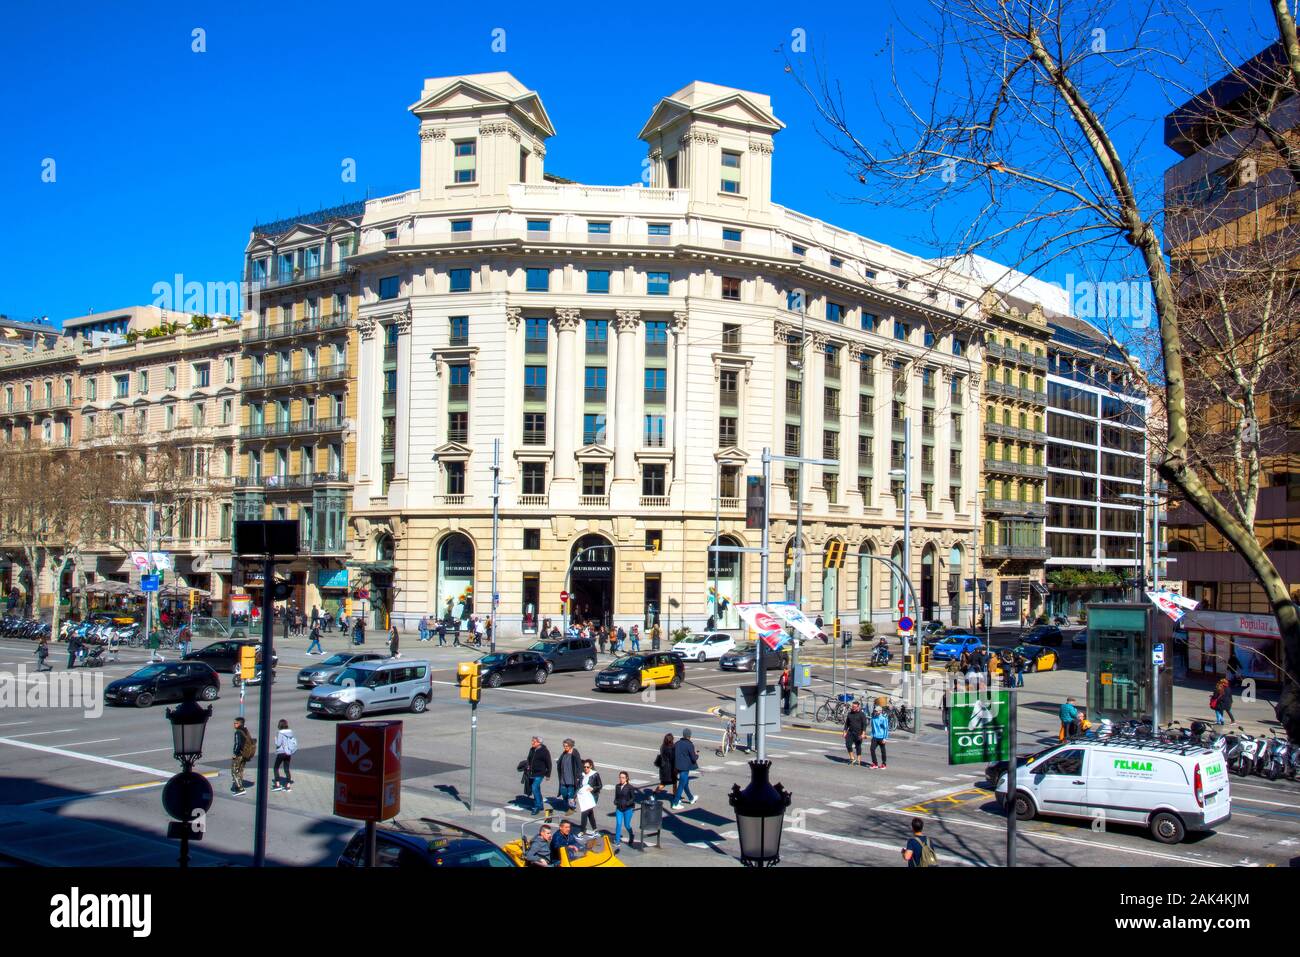 Barcelona, Spain - May 25, 2016: Versace Shop Located On Passeig De Gracia,  One Of The Most Expensive Streets In Europe. Stock Photo, Picture and  Royalty Free Image. Image 57459903.